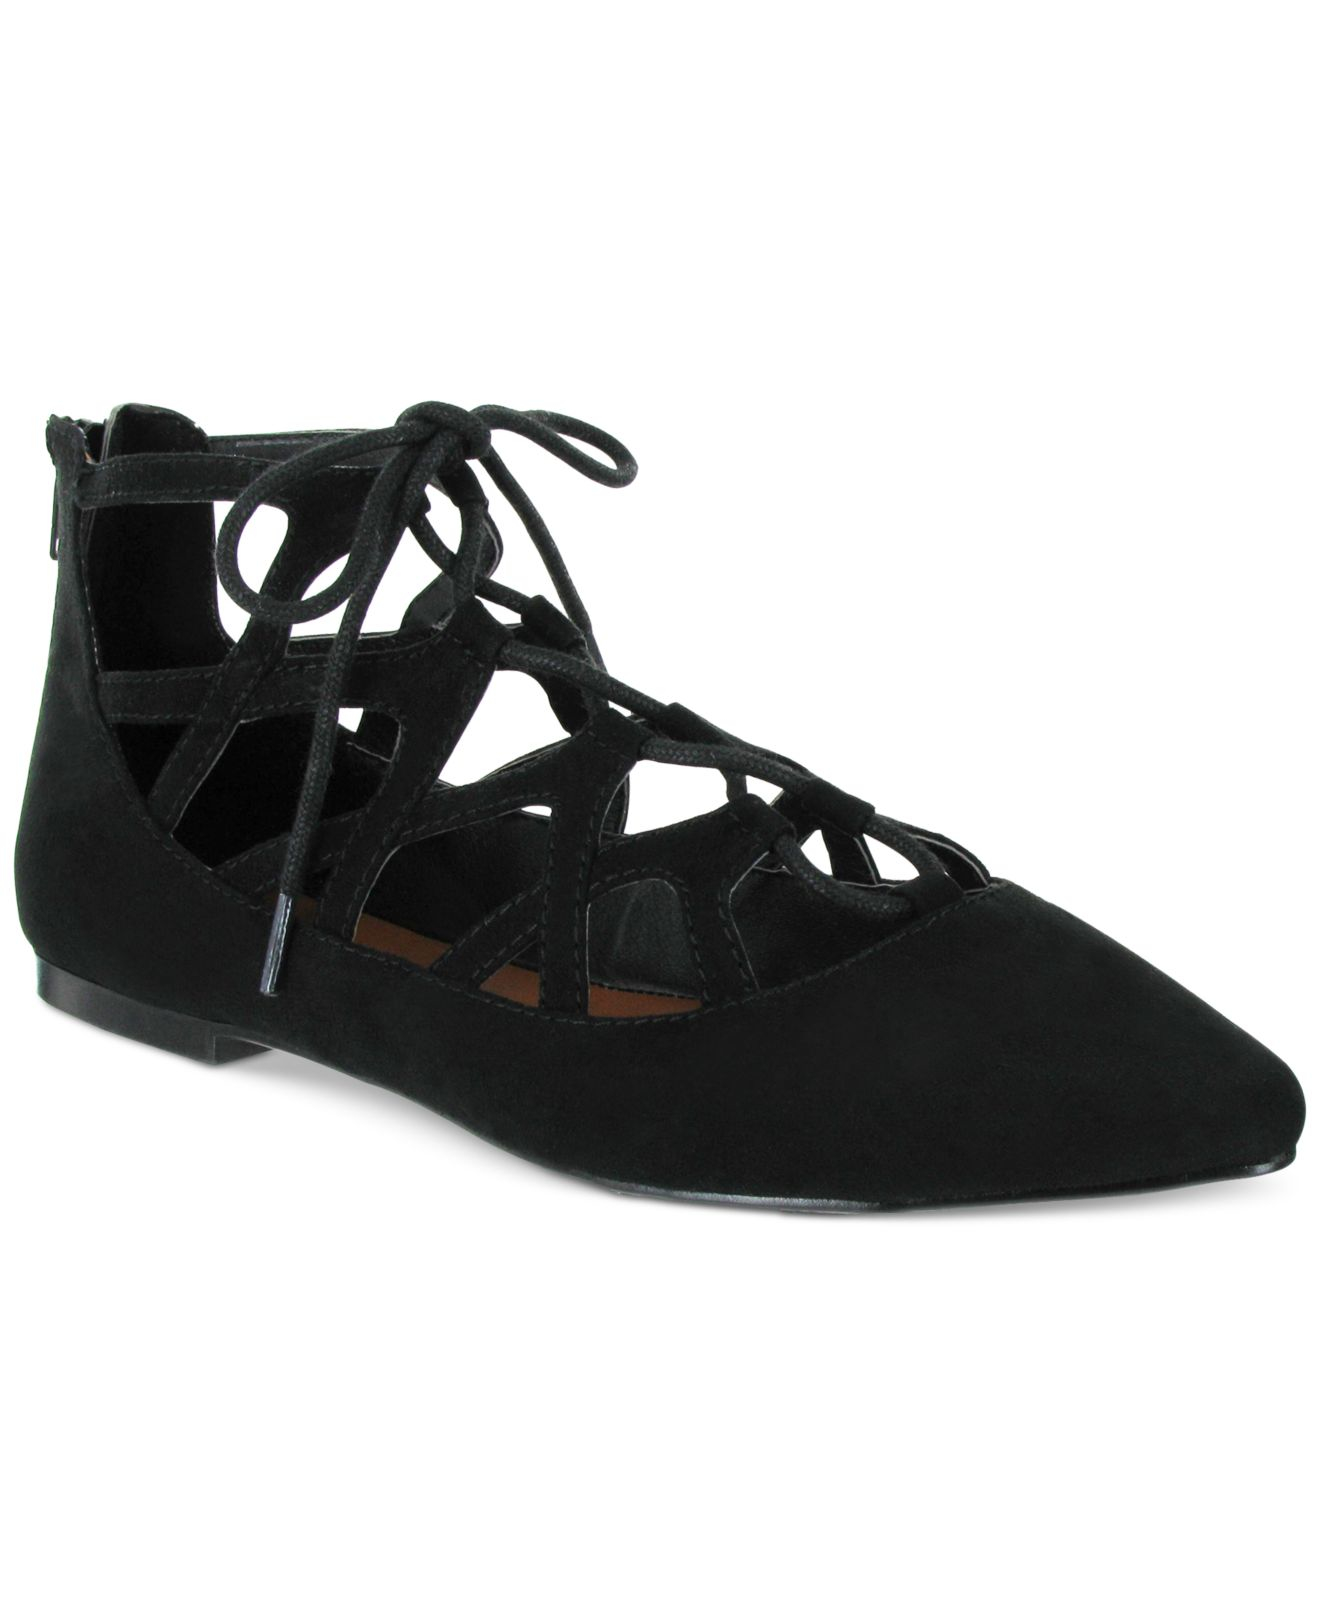 Mia Anamarie Lace-up Pointed-toe Flats in Black (Black Suede) | Lyst